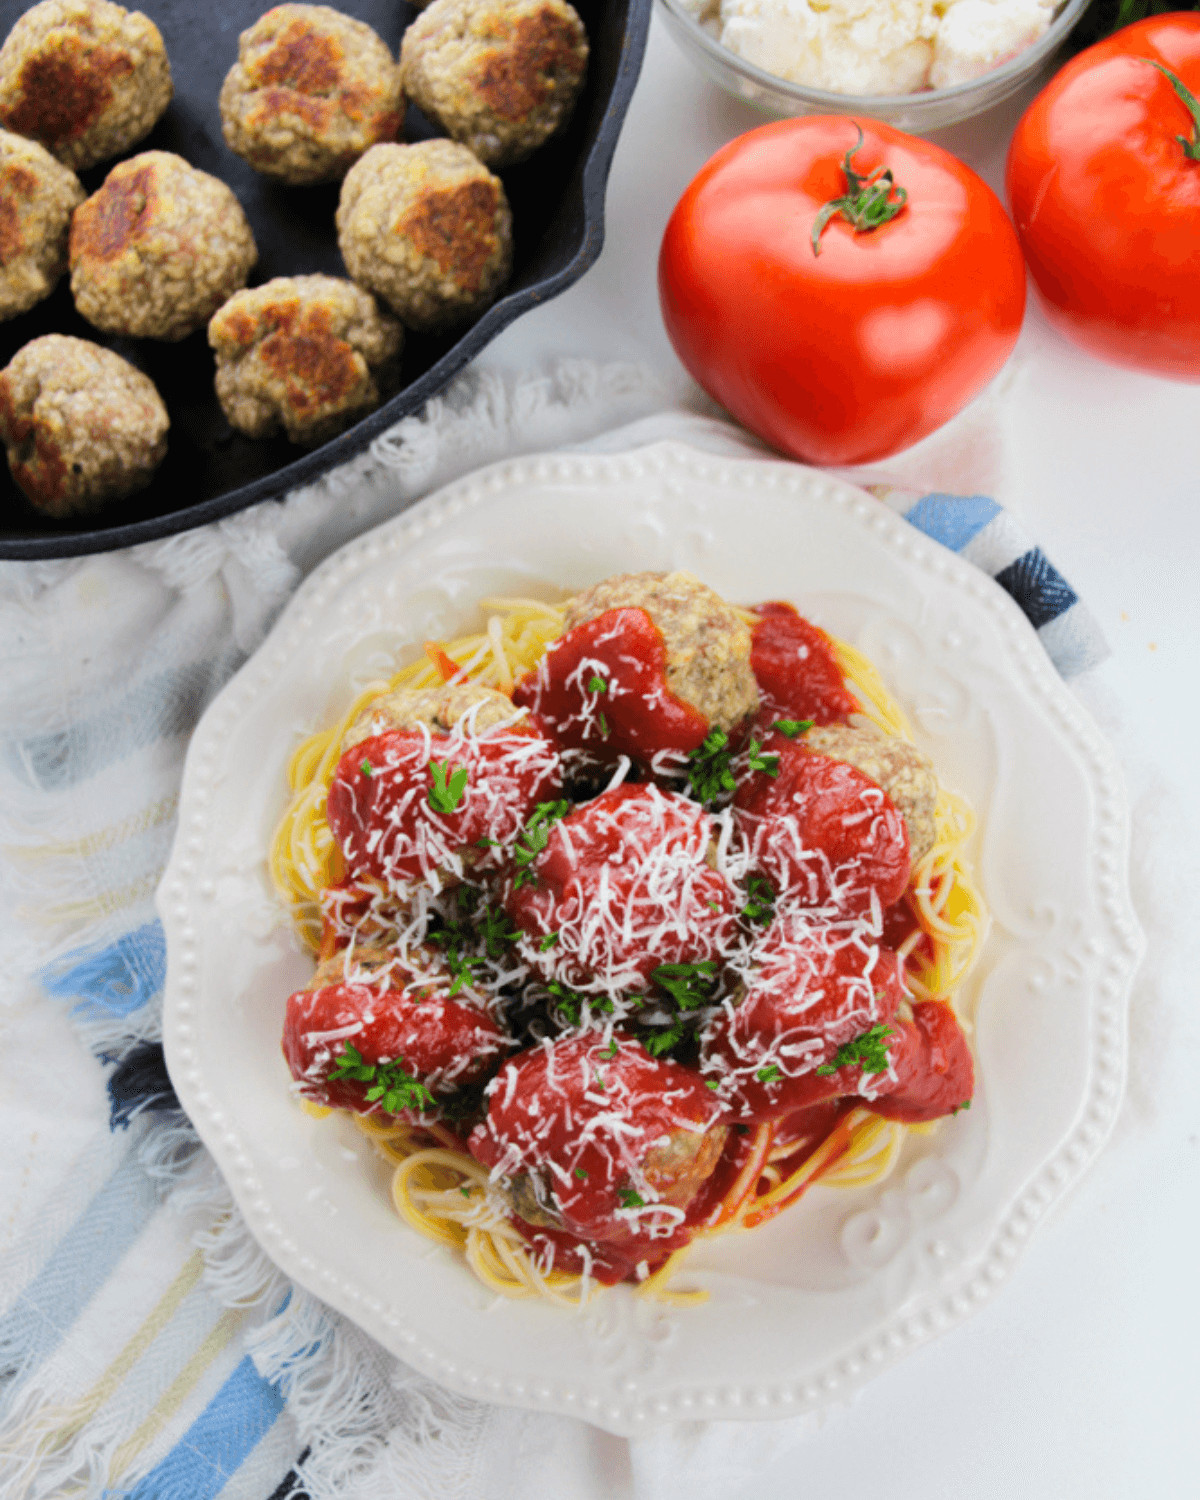 A plate of spaghetti with ricotta meatballs.